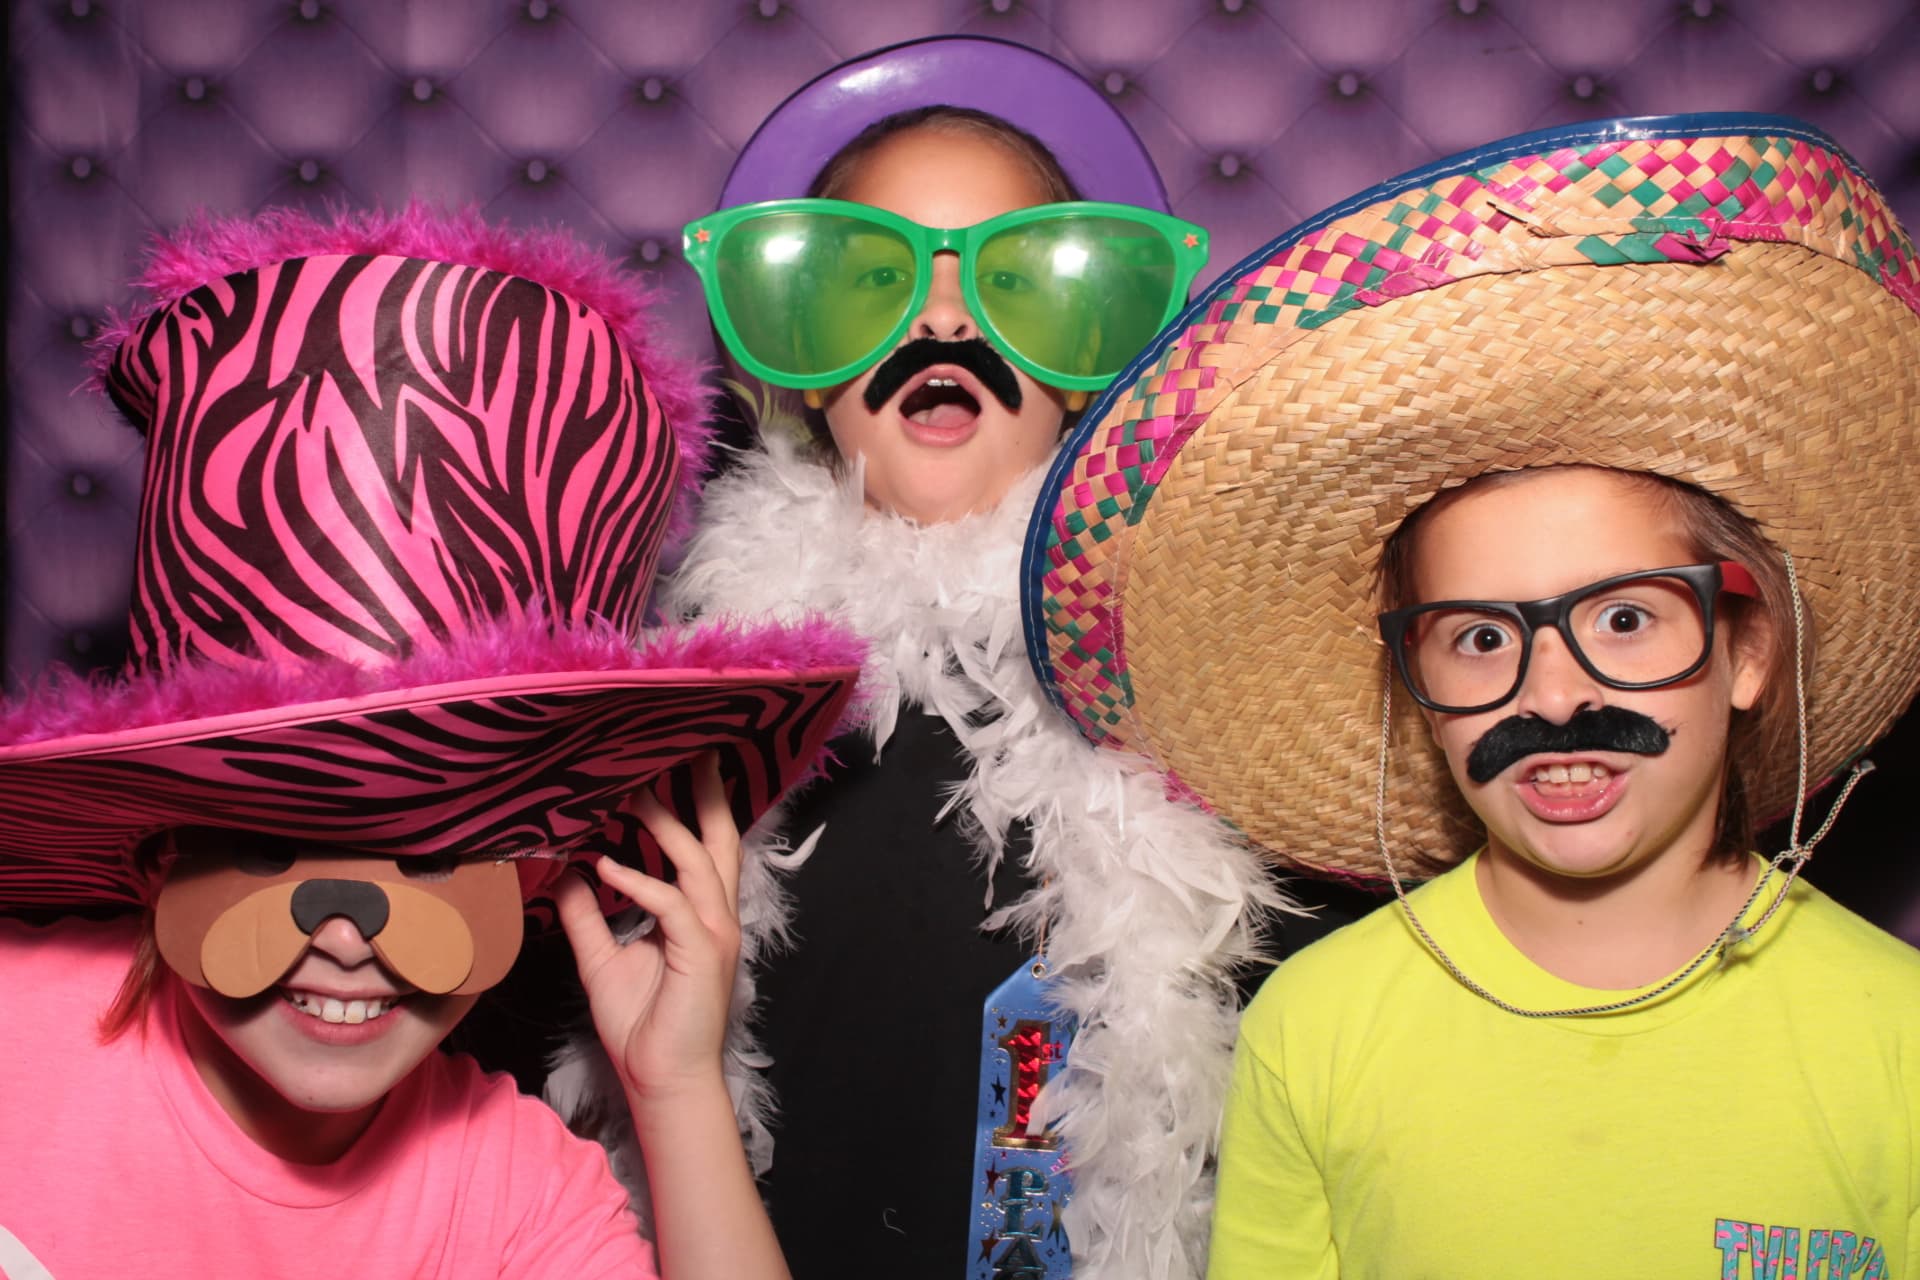 Photo Booth-Rental-Birthday-Party-Private-Fun-No.1- Memories-Austin-Props-Backdrops